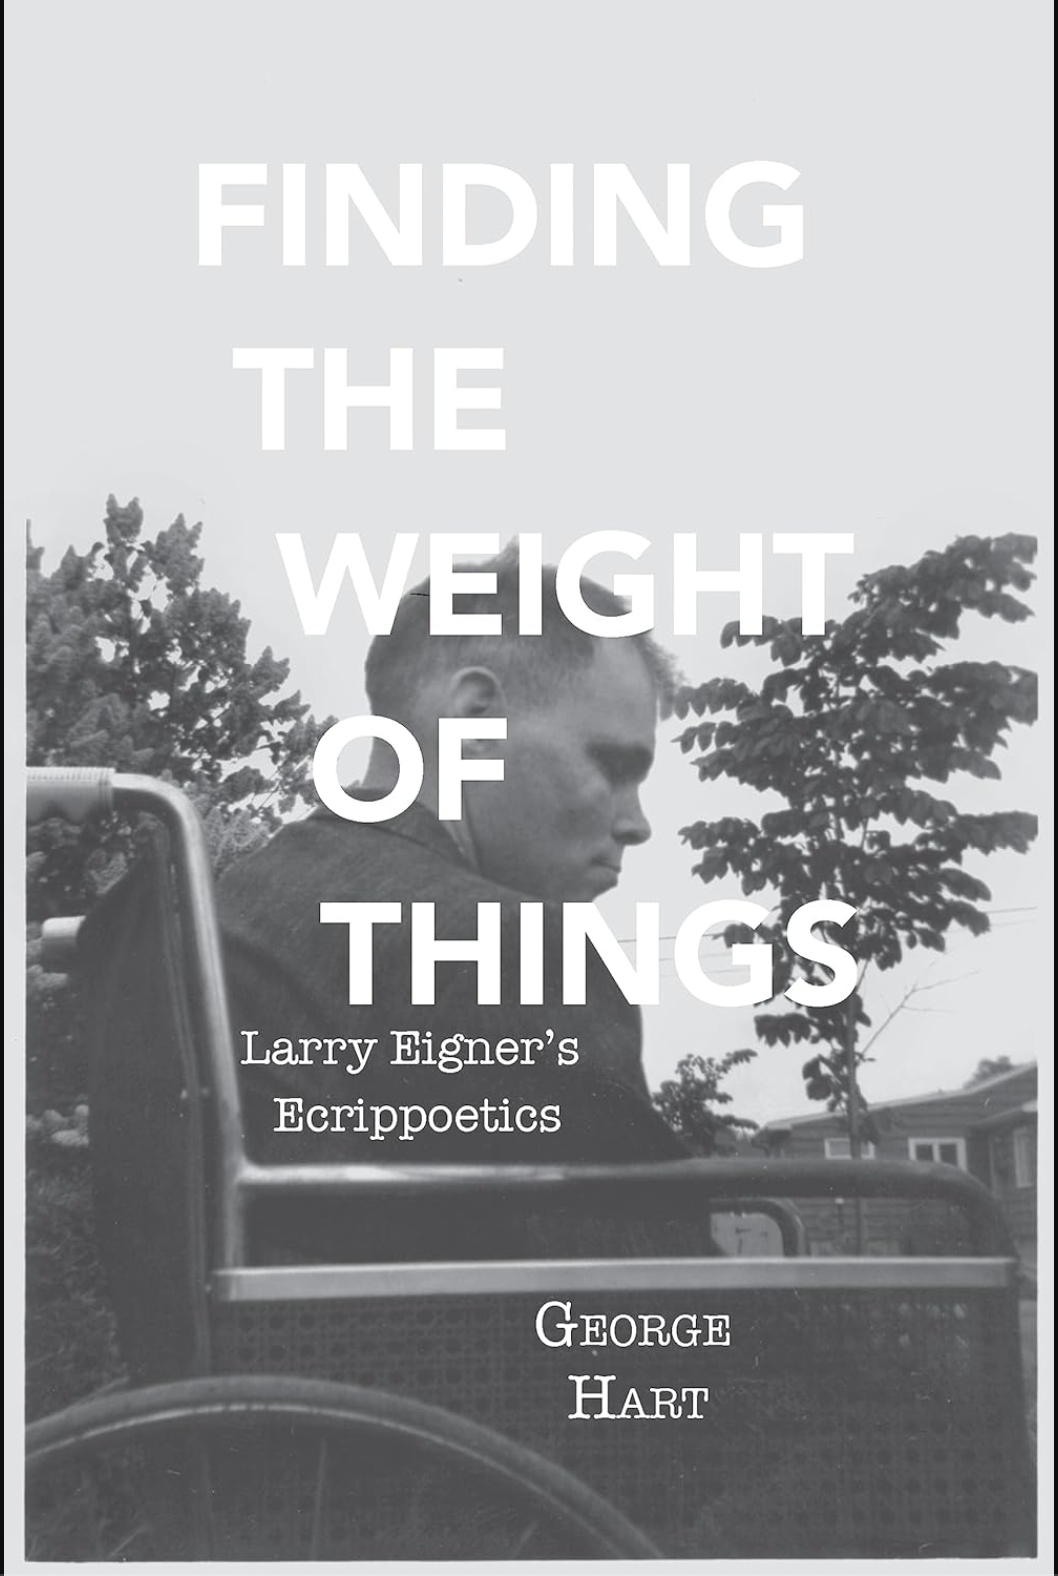 Finding the Weight of Things: Larry Eigner's Ecrippoetics